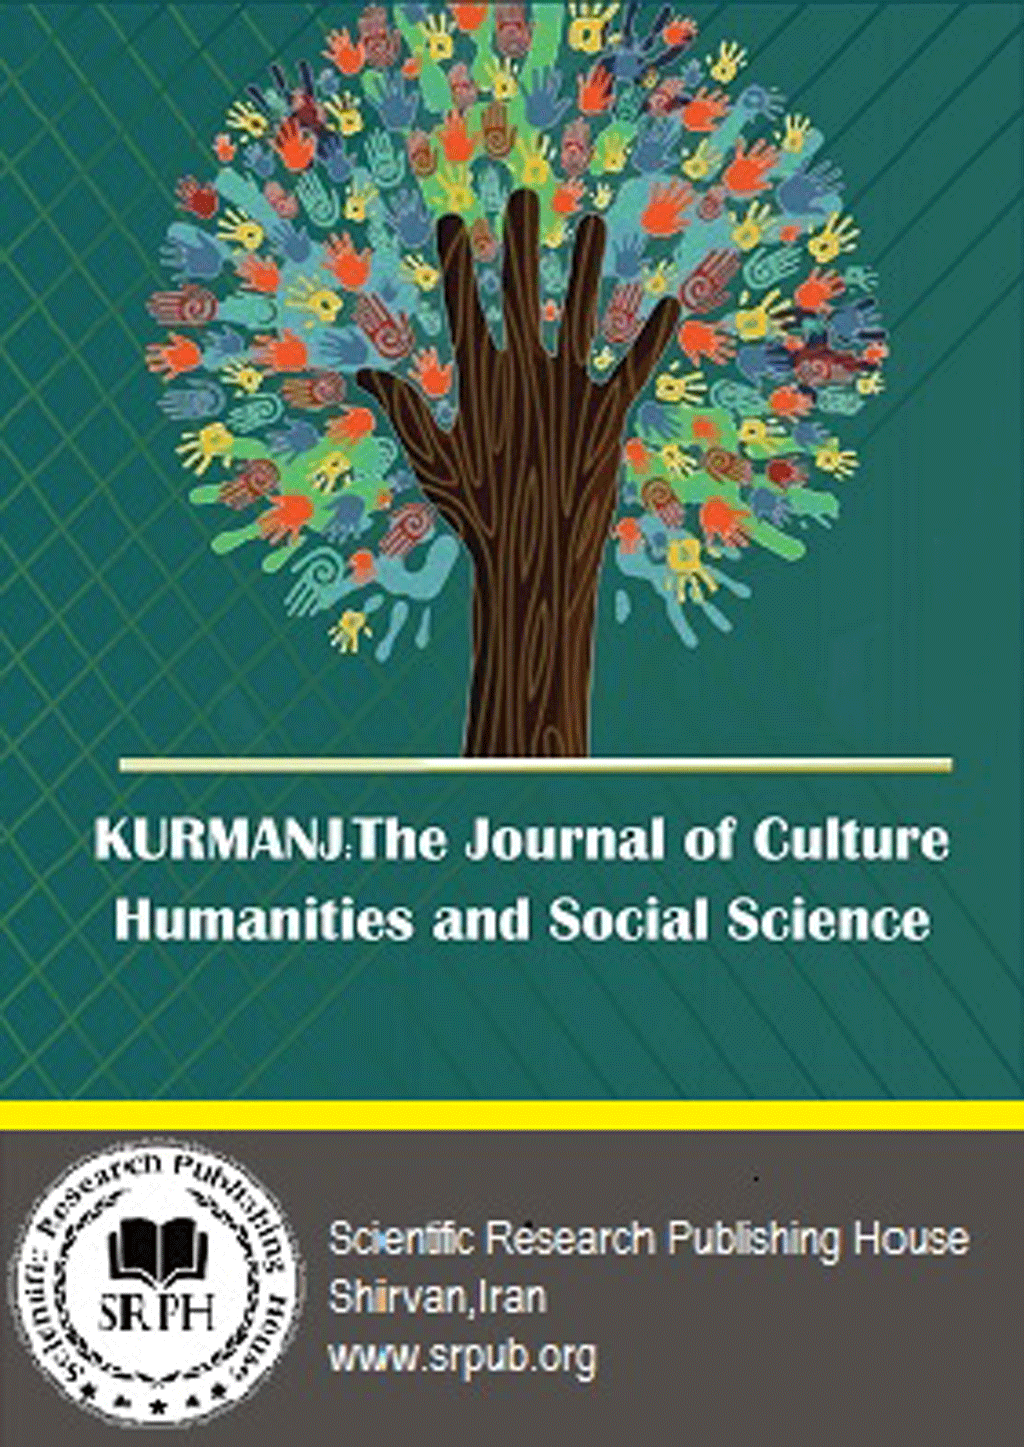 Culture, Humanities and Social Science - Winter 2021, Volume 3 - Number 1